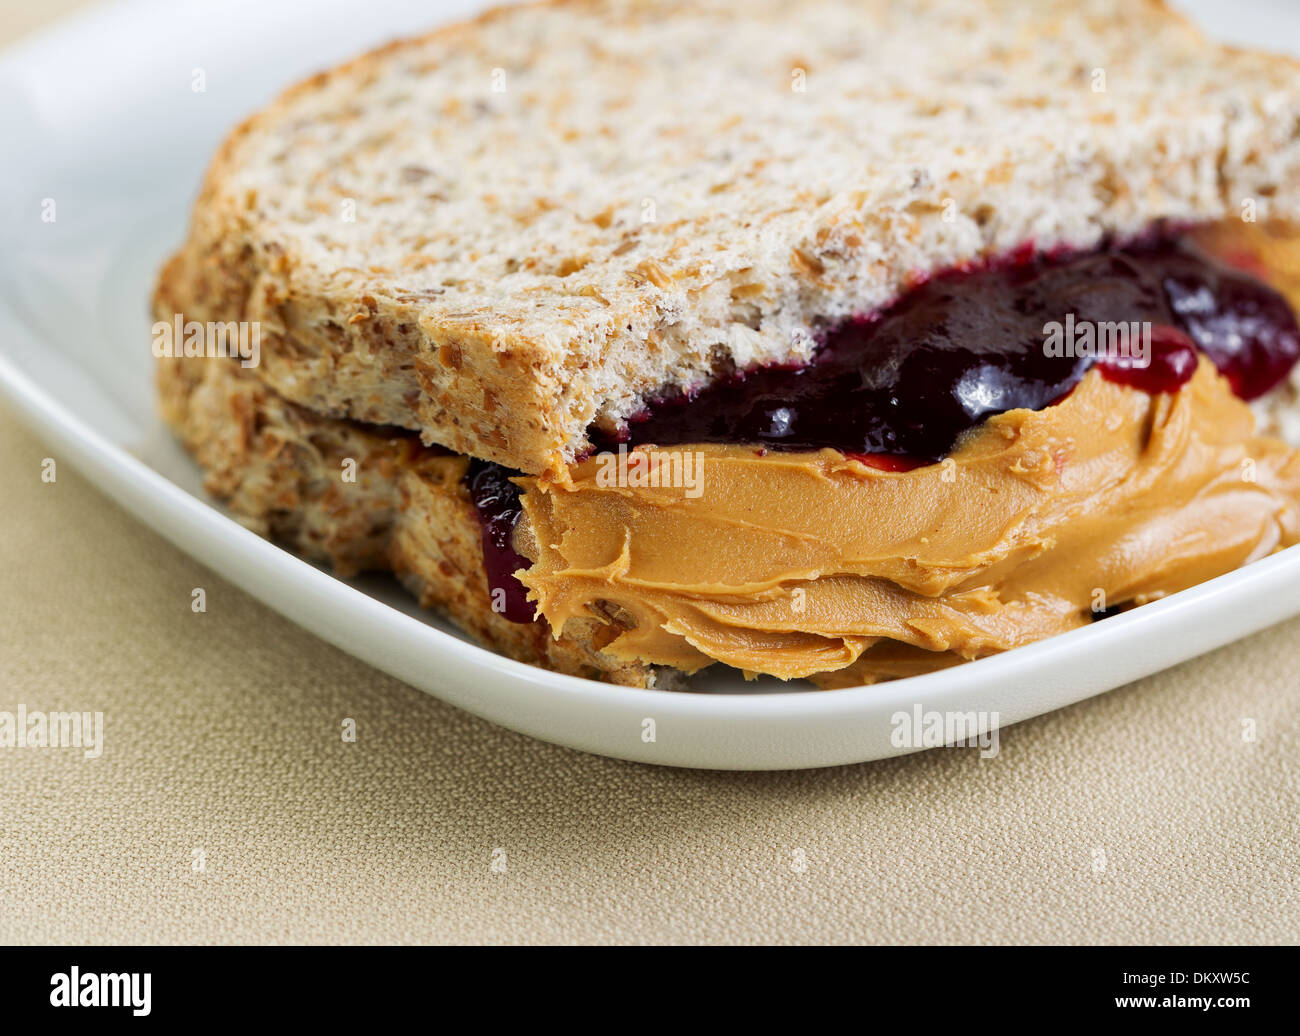 Closeup horizontal photo of a peanut butter and jelly sandwich cut in half, inside white plate on textured table cloth Stock Photo